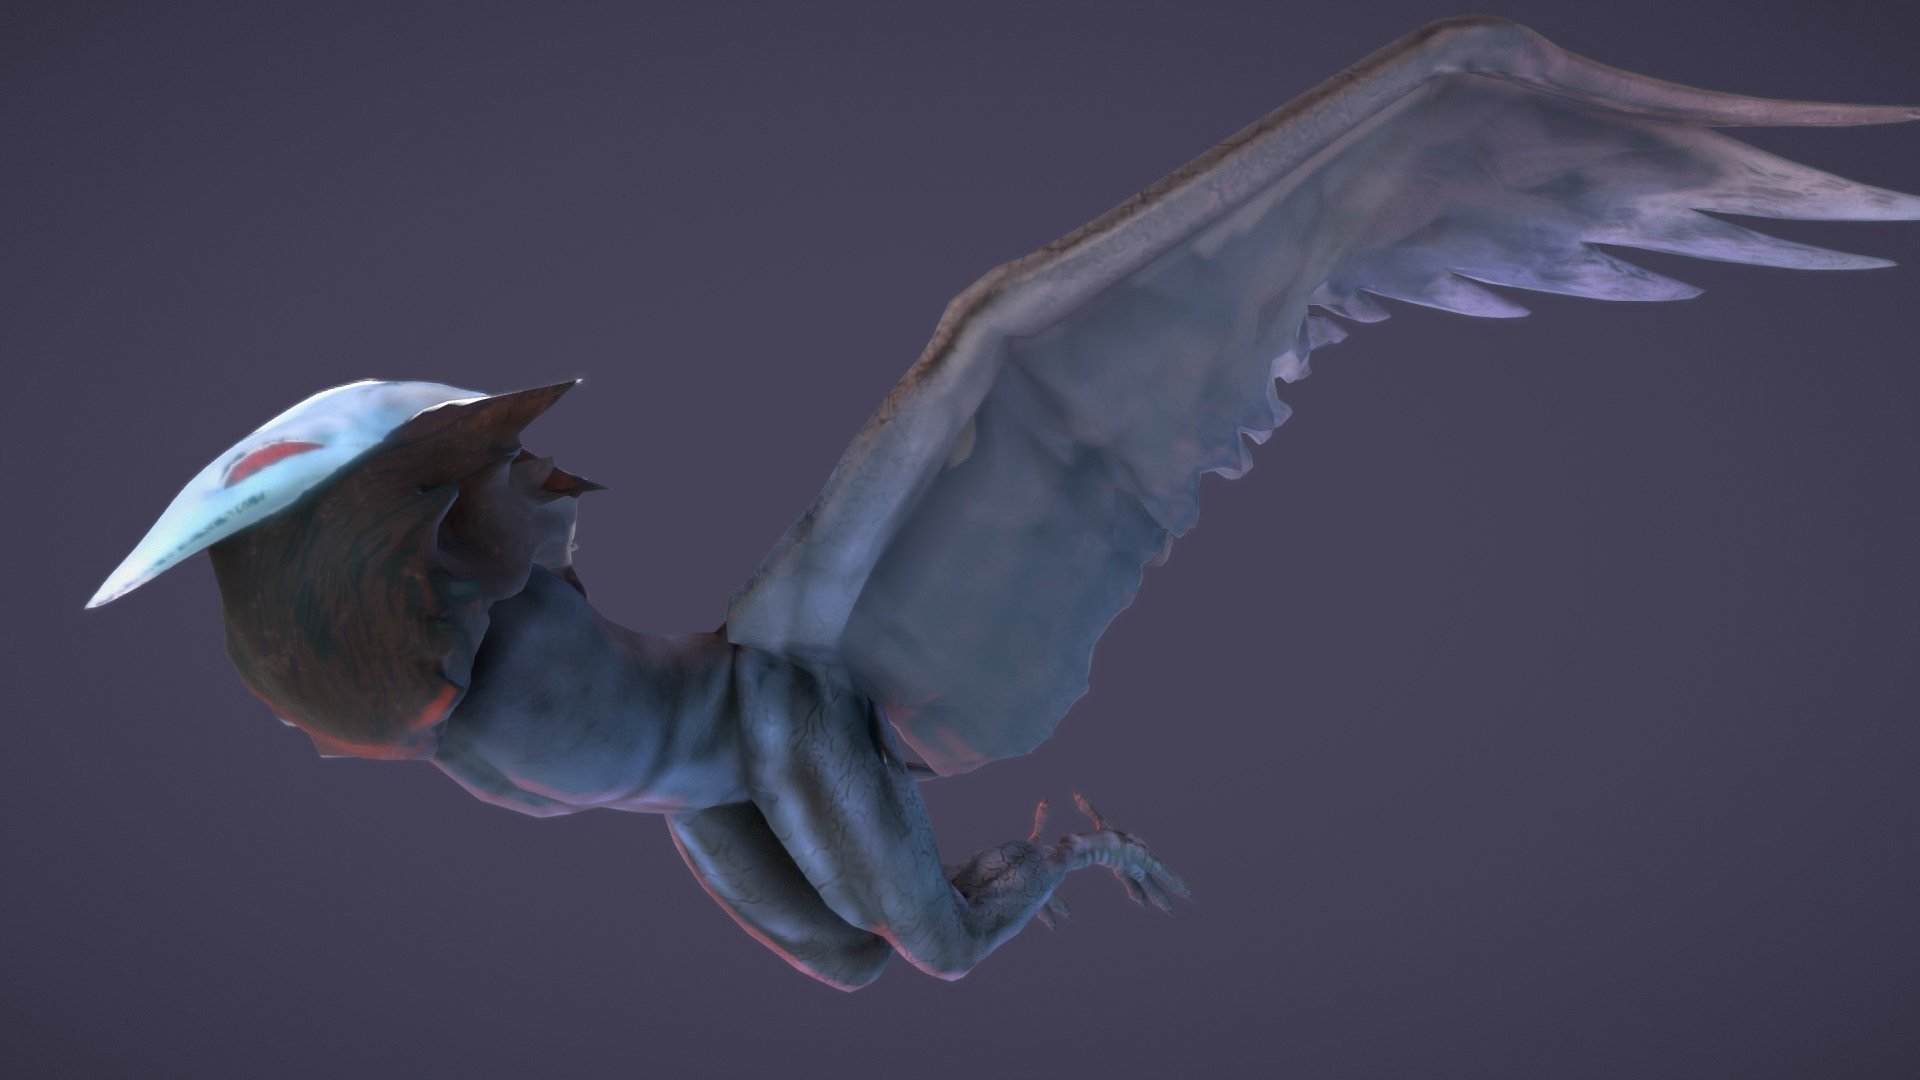 Harpy creature for a 3rd Person Action Prototype for Unreal Engine 4: Apophis

Rigged and Animated by me. Model and Texture by Gabriel Garcia. https://sketchfab.com/gabrieljgarcia - Apophis - Bone Harpy - 3D model by Daniel Archilla (@danrigarts) 3d model